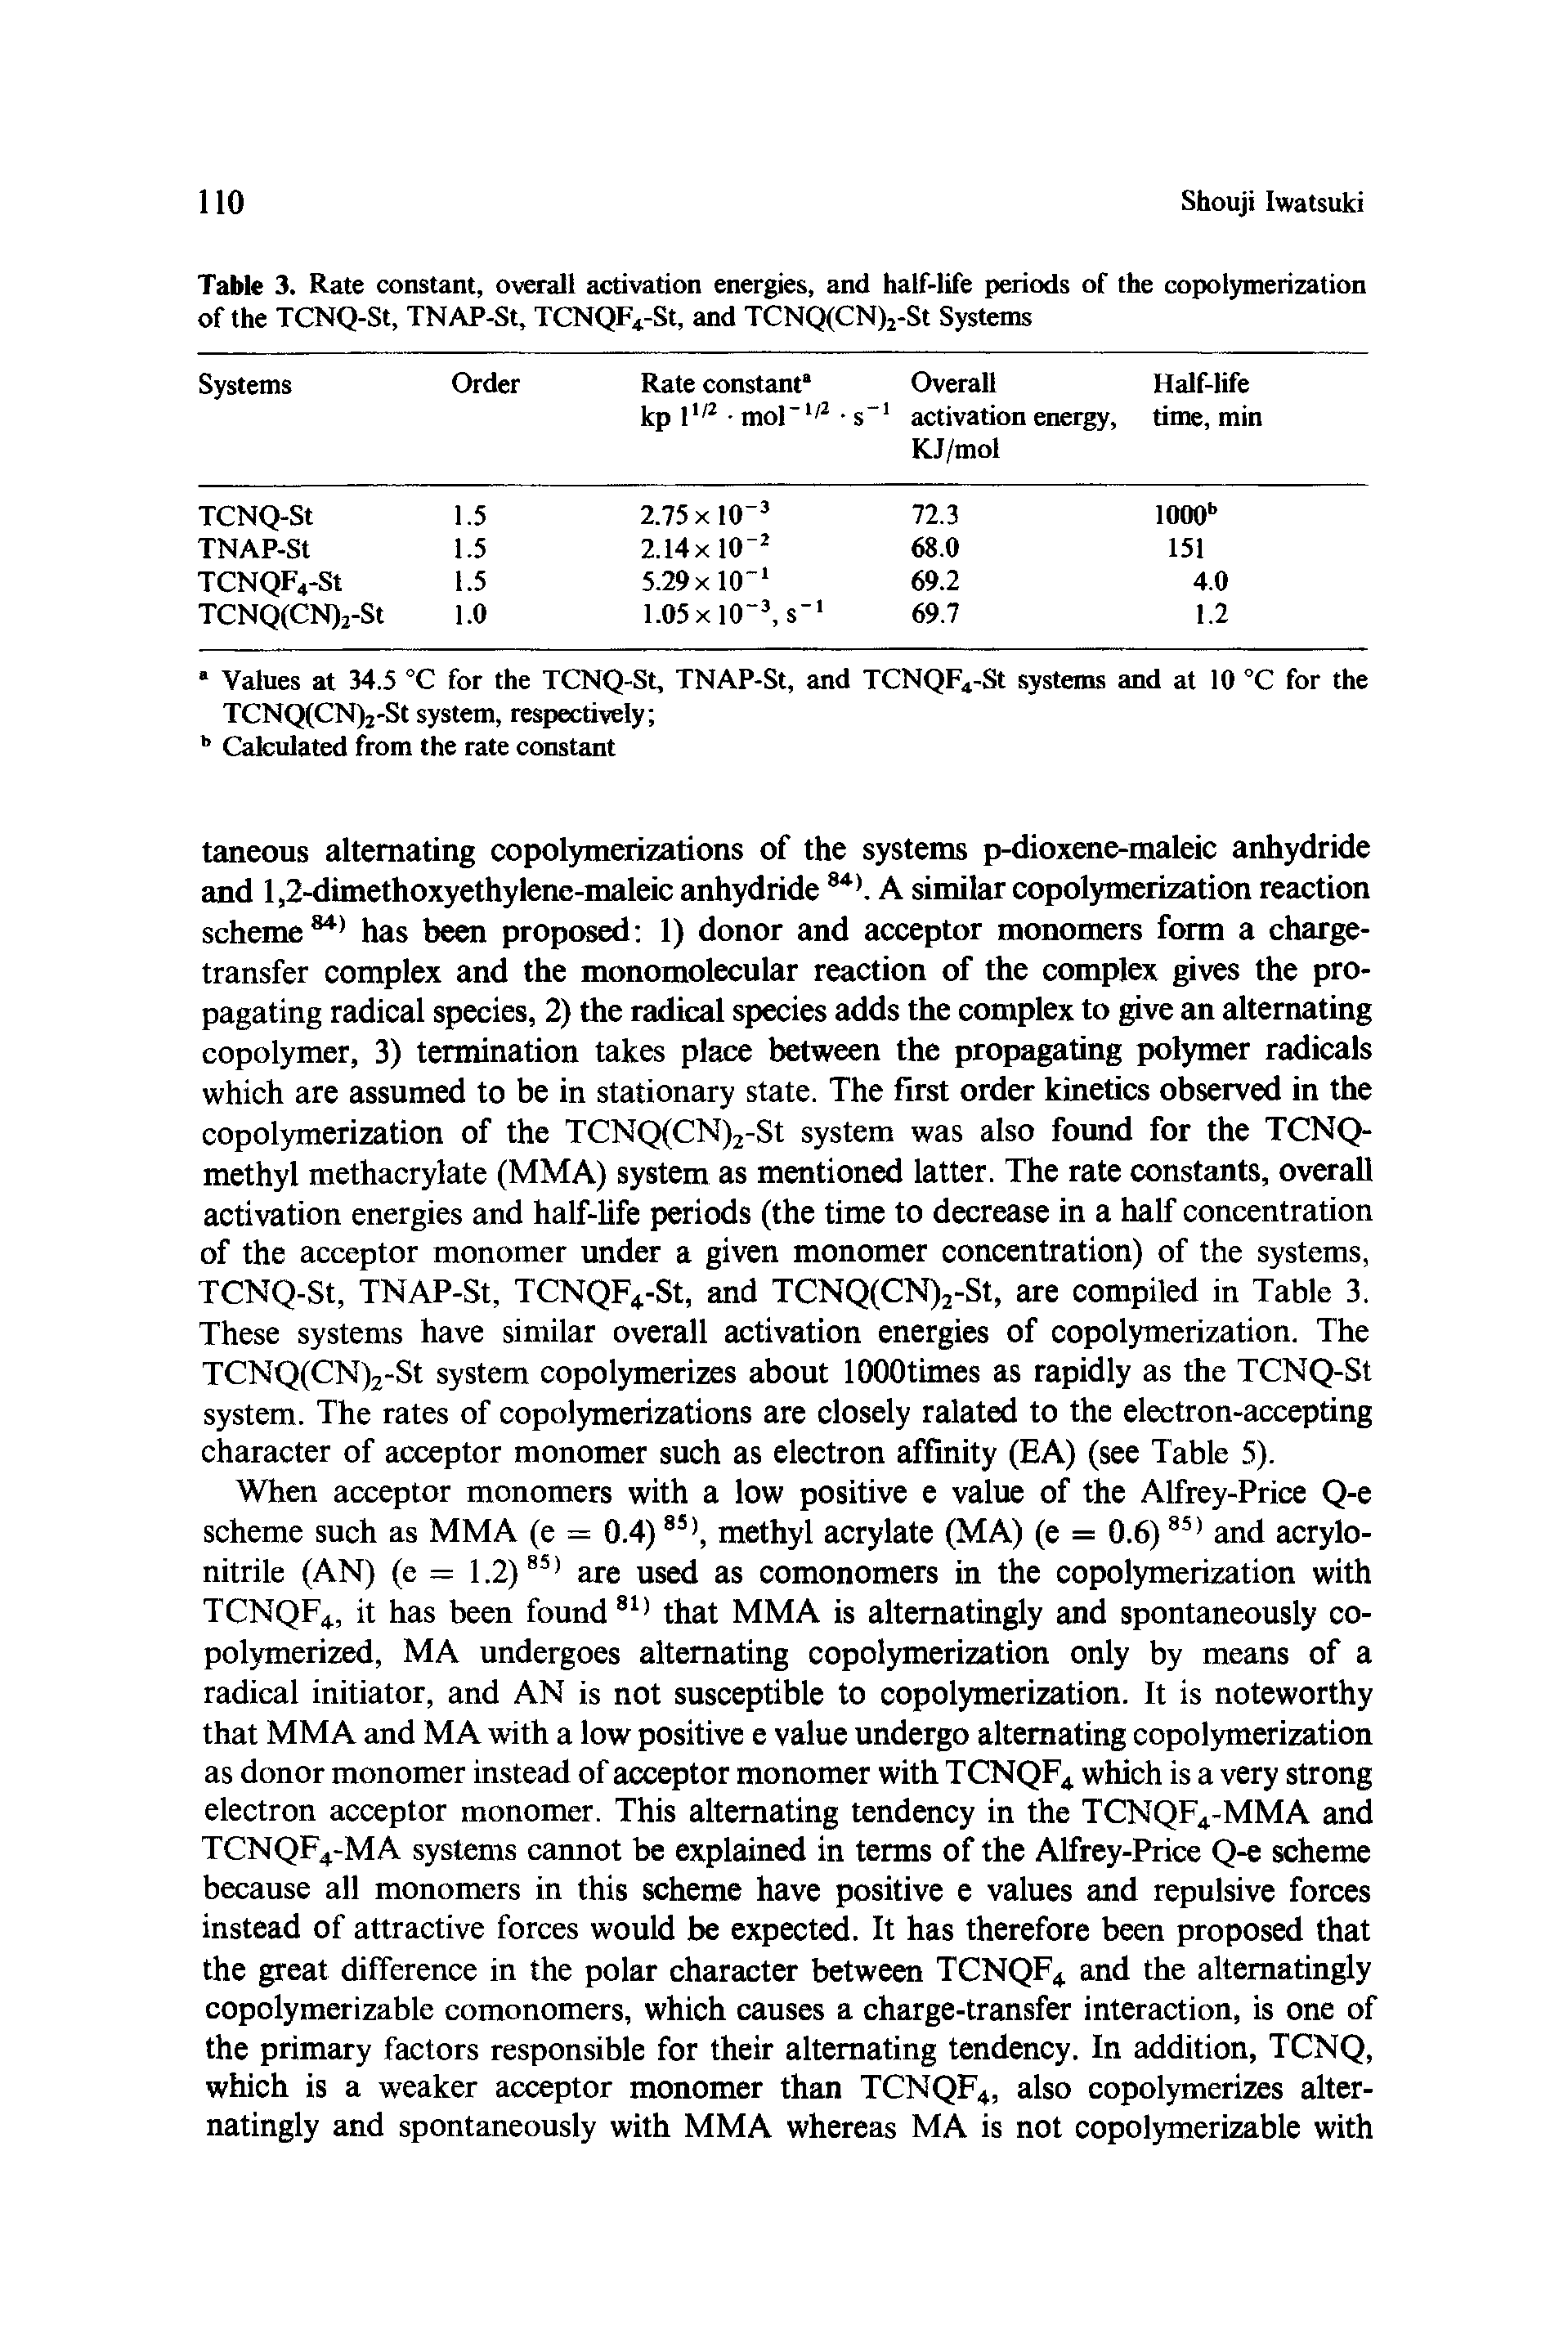 Table 3. Rate constant, overall activation energies, and half-life periods of the copolymerization of the TCNQ-St, TNAP-St, TGNQF4-St, and TCNQ(CN)2-St Systems...